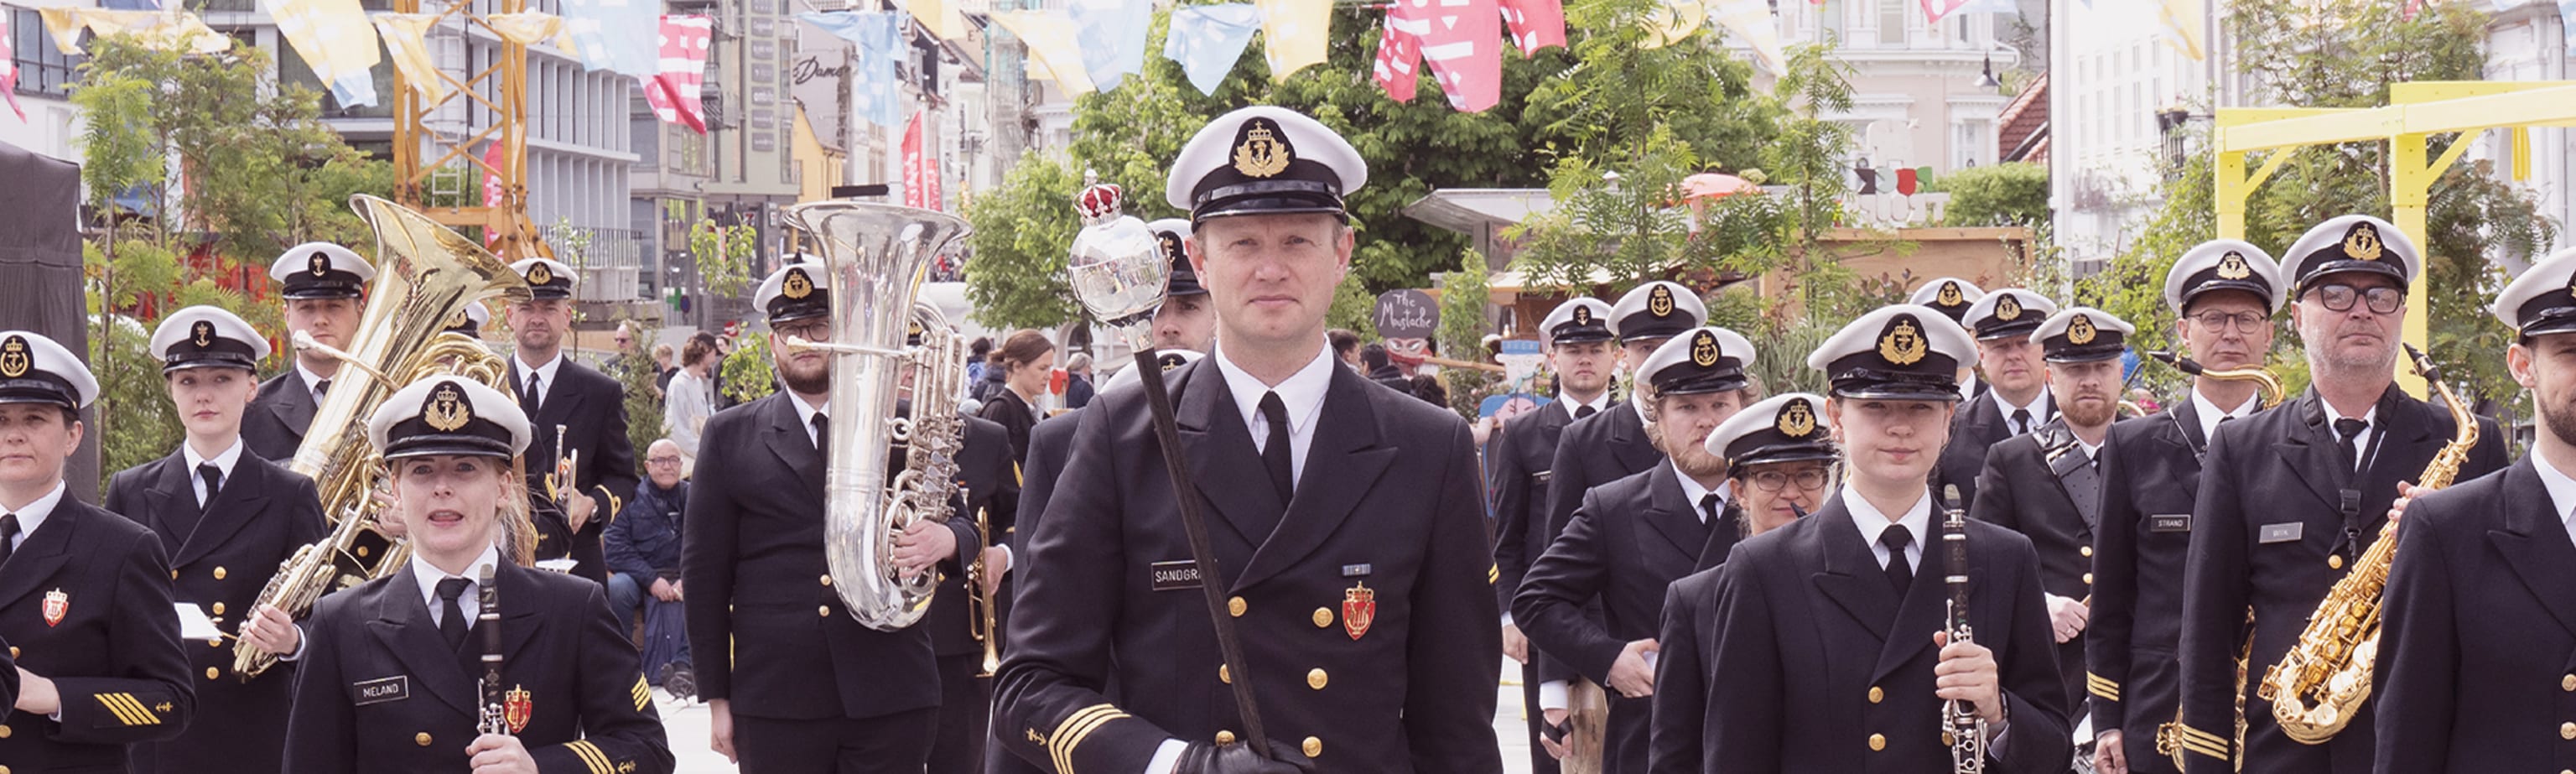 The Norwegian Naval Forces Band - Festival square